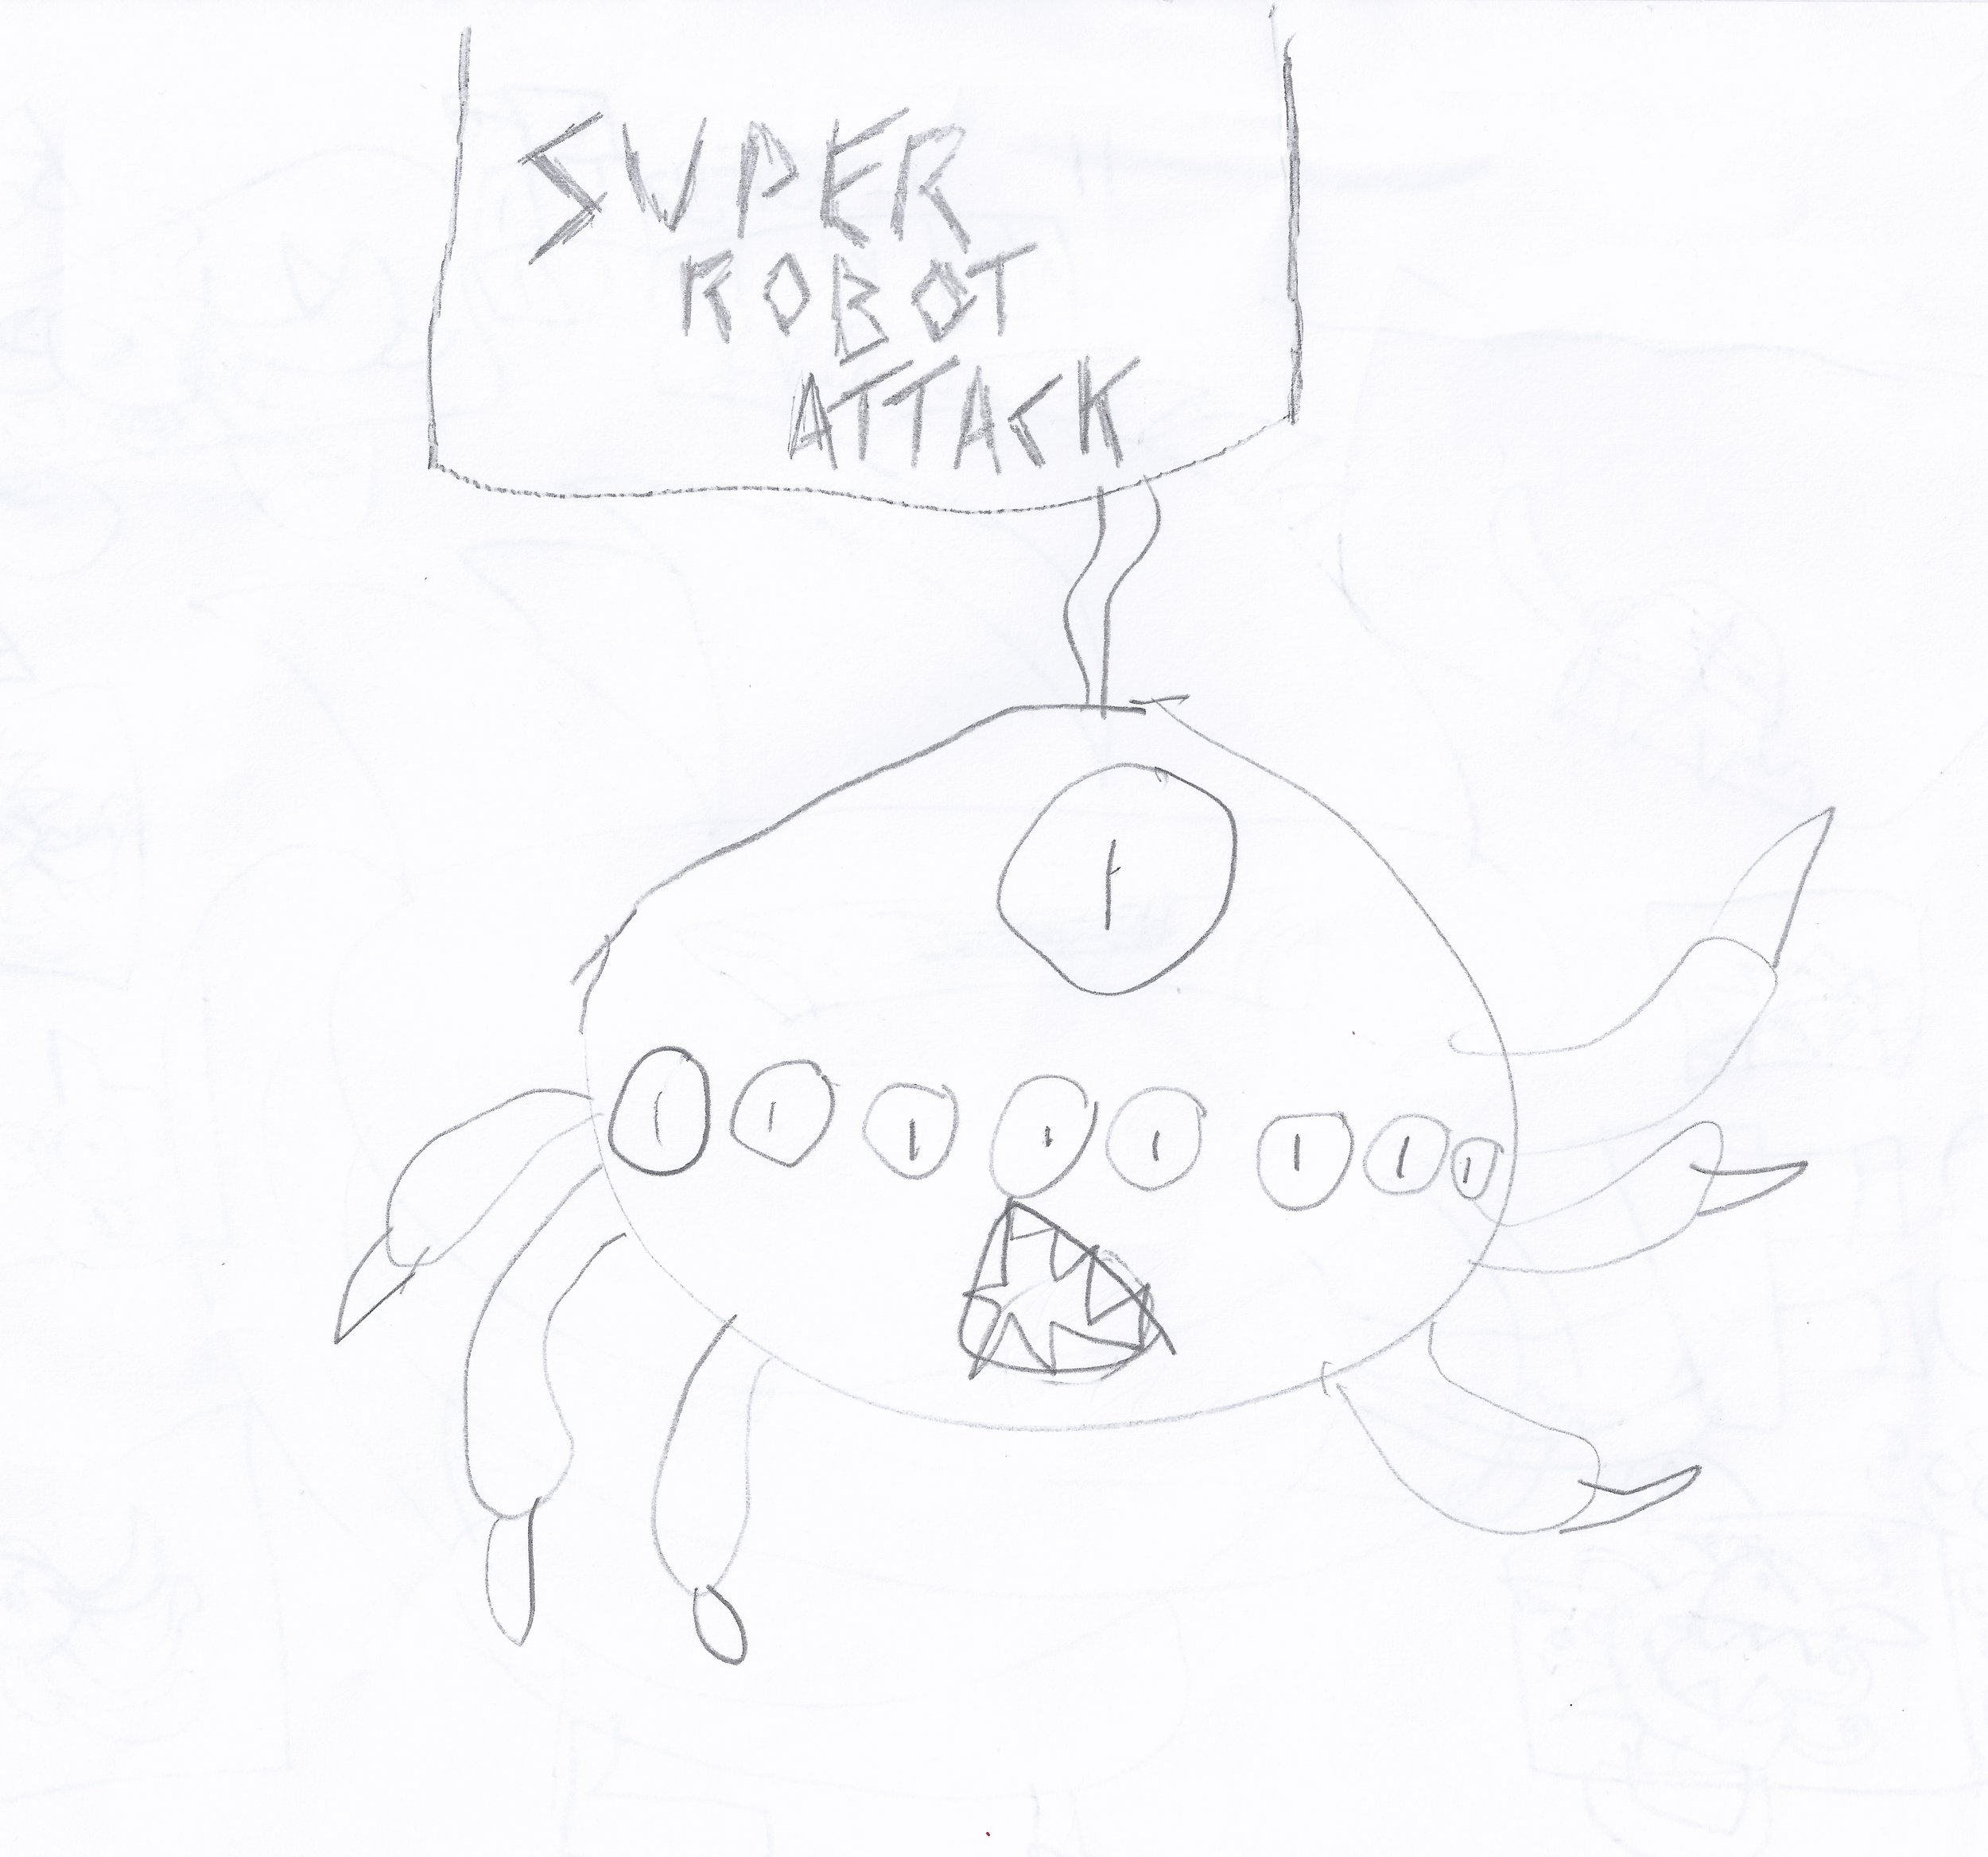 2018-0924 Andrew - Drawing - Super Robot Attack.jpg